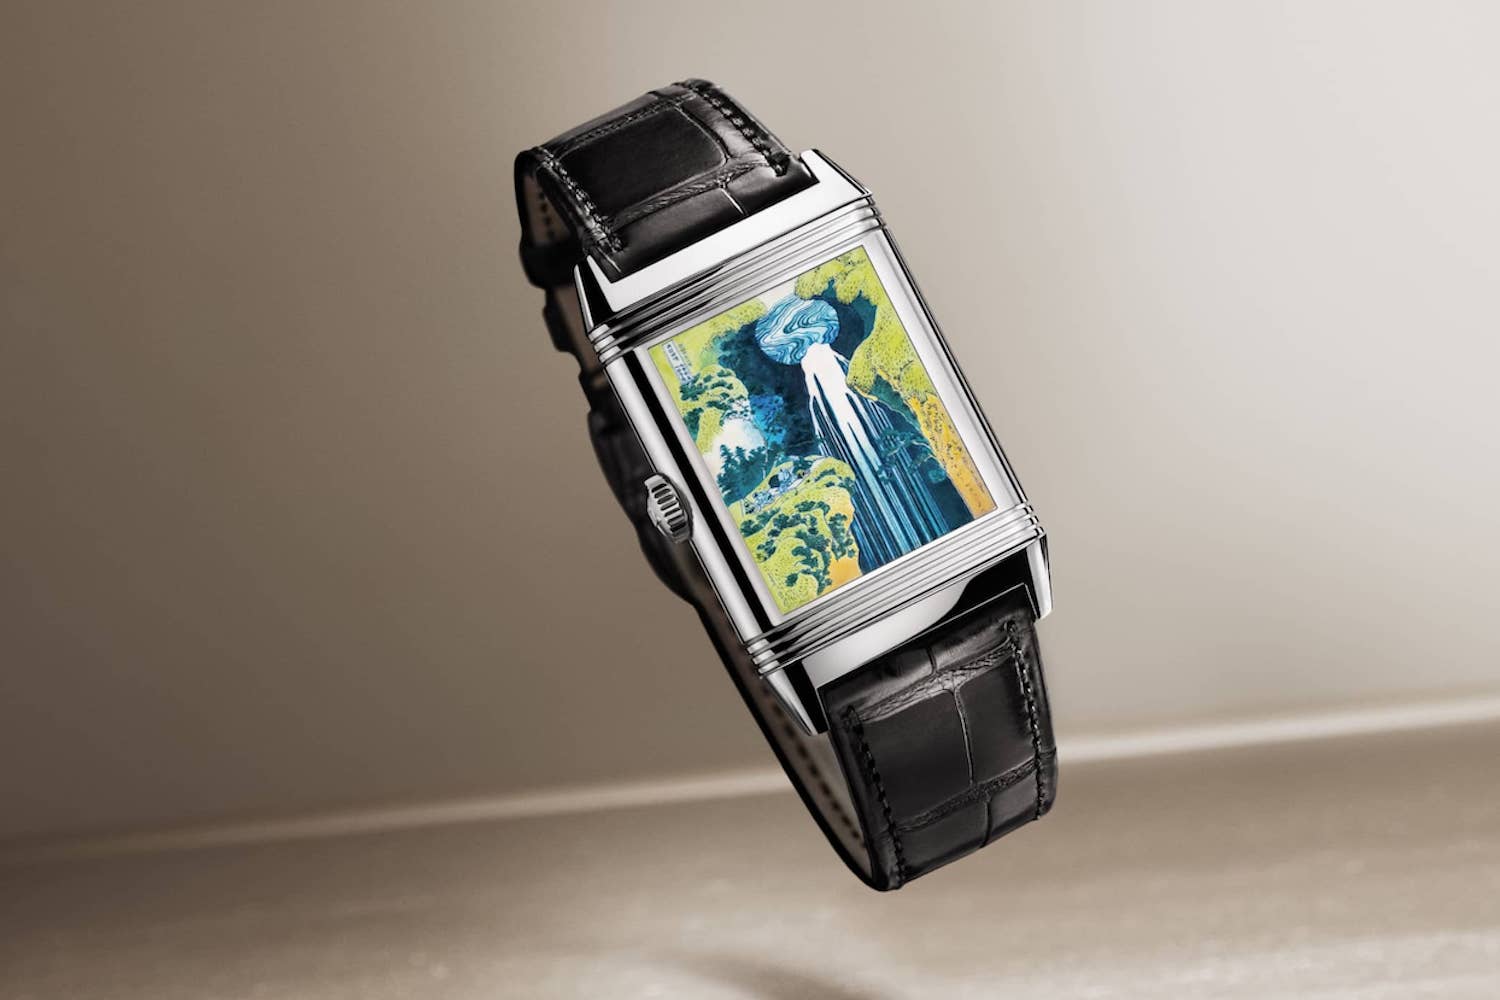 a fancy image-faced Jaeger-LeCoultre watch on a light background